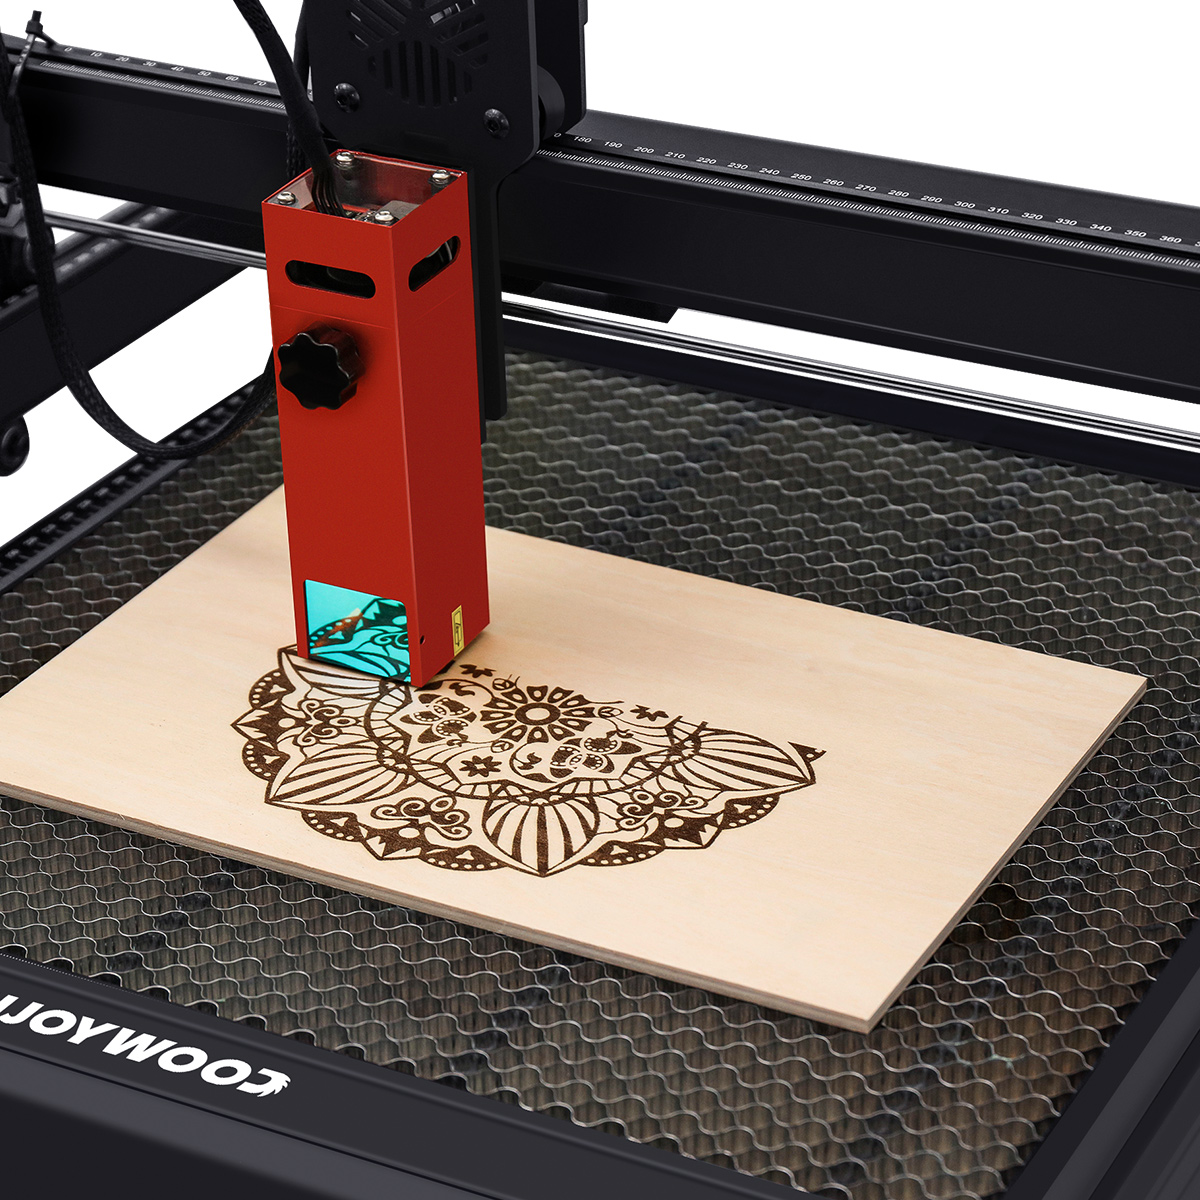 Find ENJOYWOOD CEL E10 60W Laser Engraver Cutter Machine Real 10W Compressed Spot Laser Engraver 11000mm/min Diode Laser Engraving Machine for Wood Cutting Metal Colorful Engraving for Sale on Gipsybee.com with cryptocurrencies